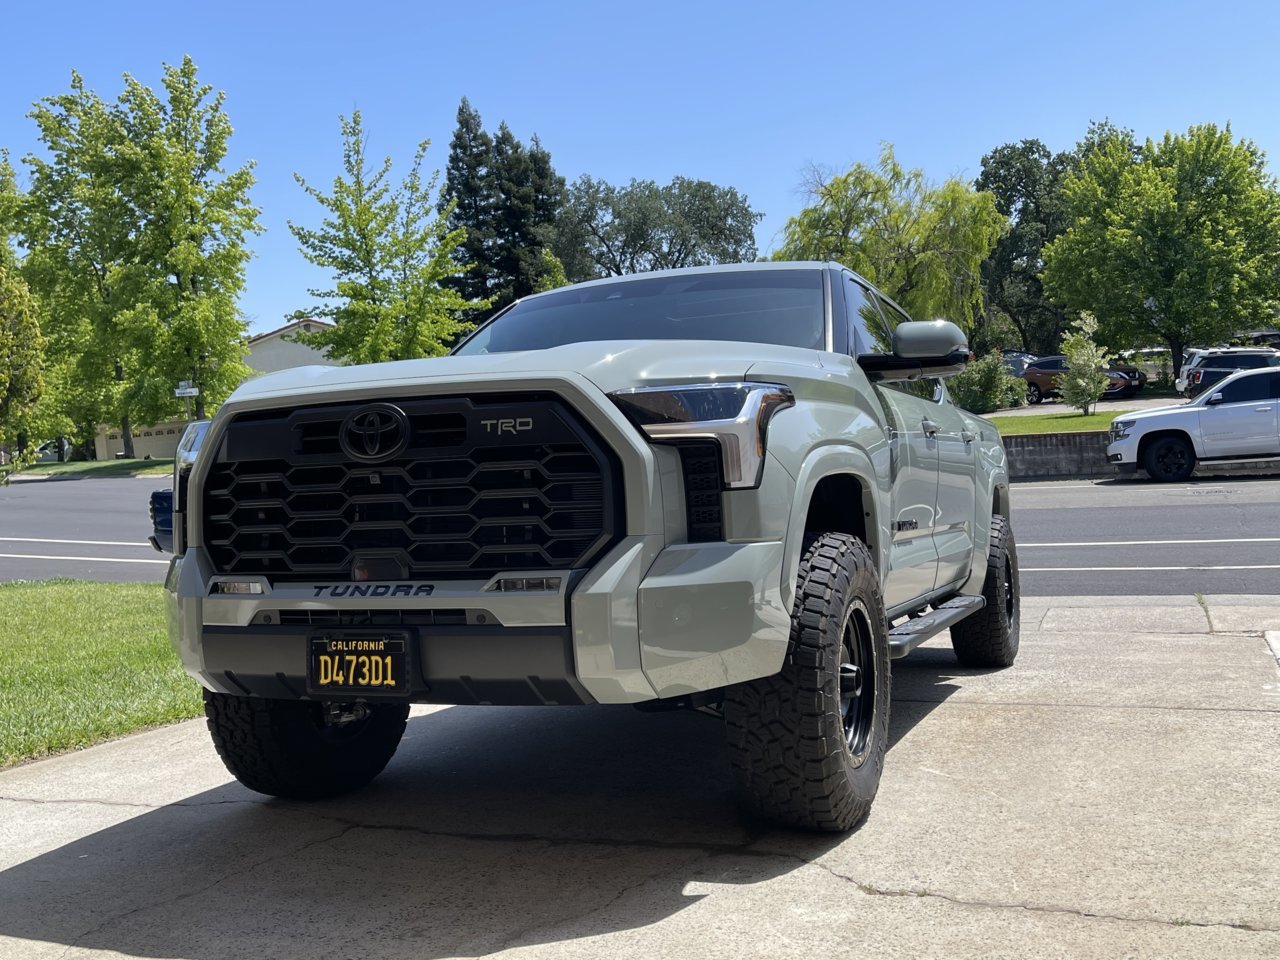 Lunar Rock TRD OffRoadGrill Matching (Pics Requested) Toyota